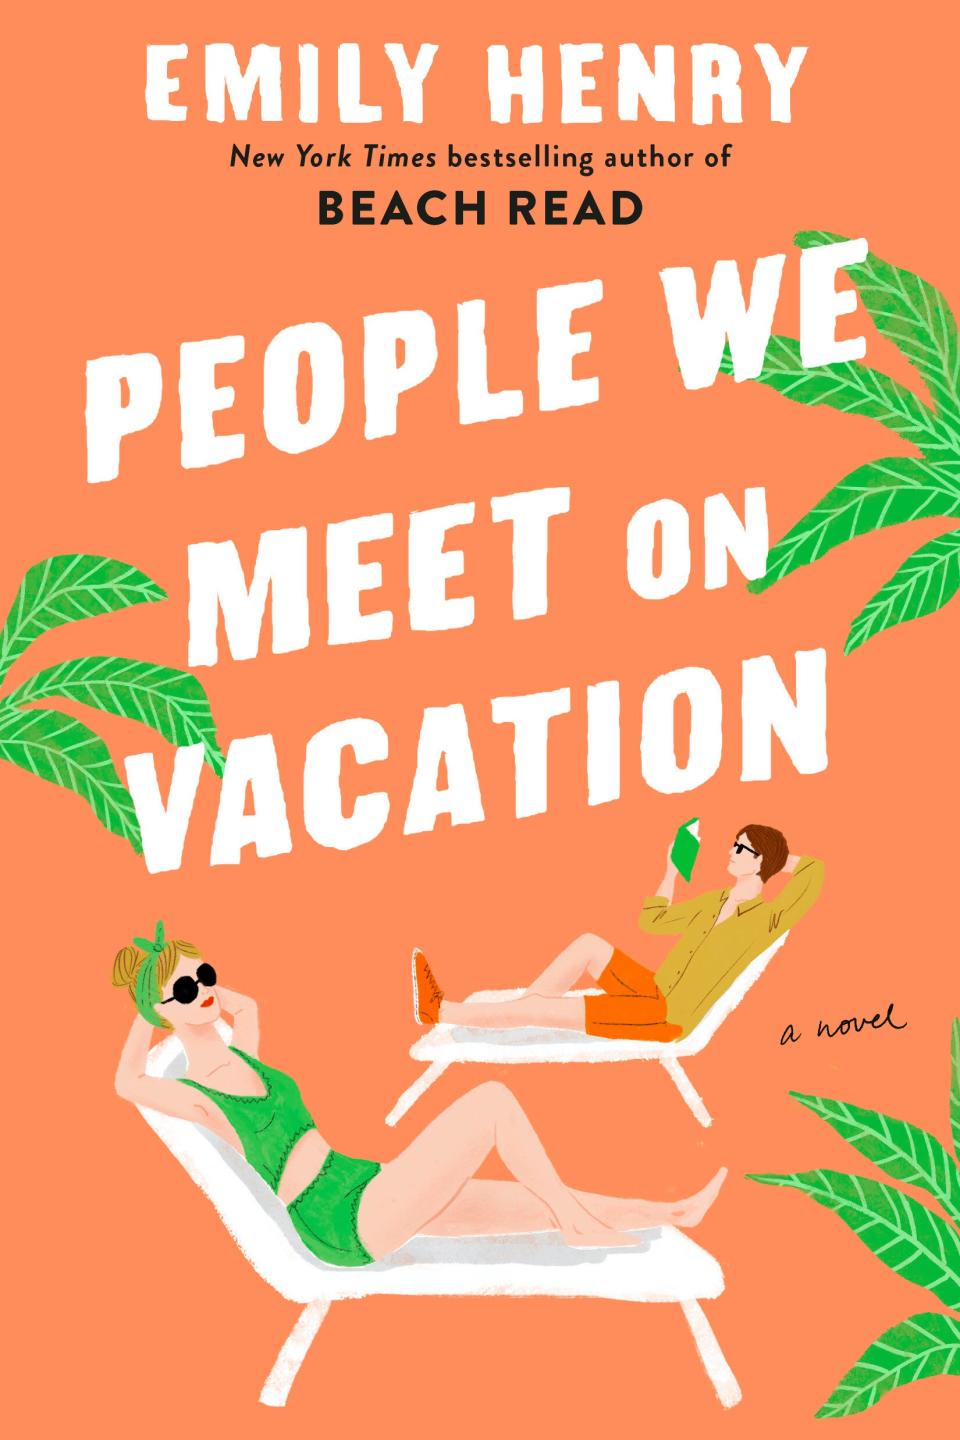 “People We Meet on Vacation” by Emily Henry.